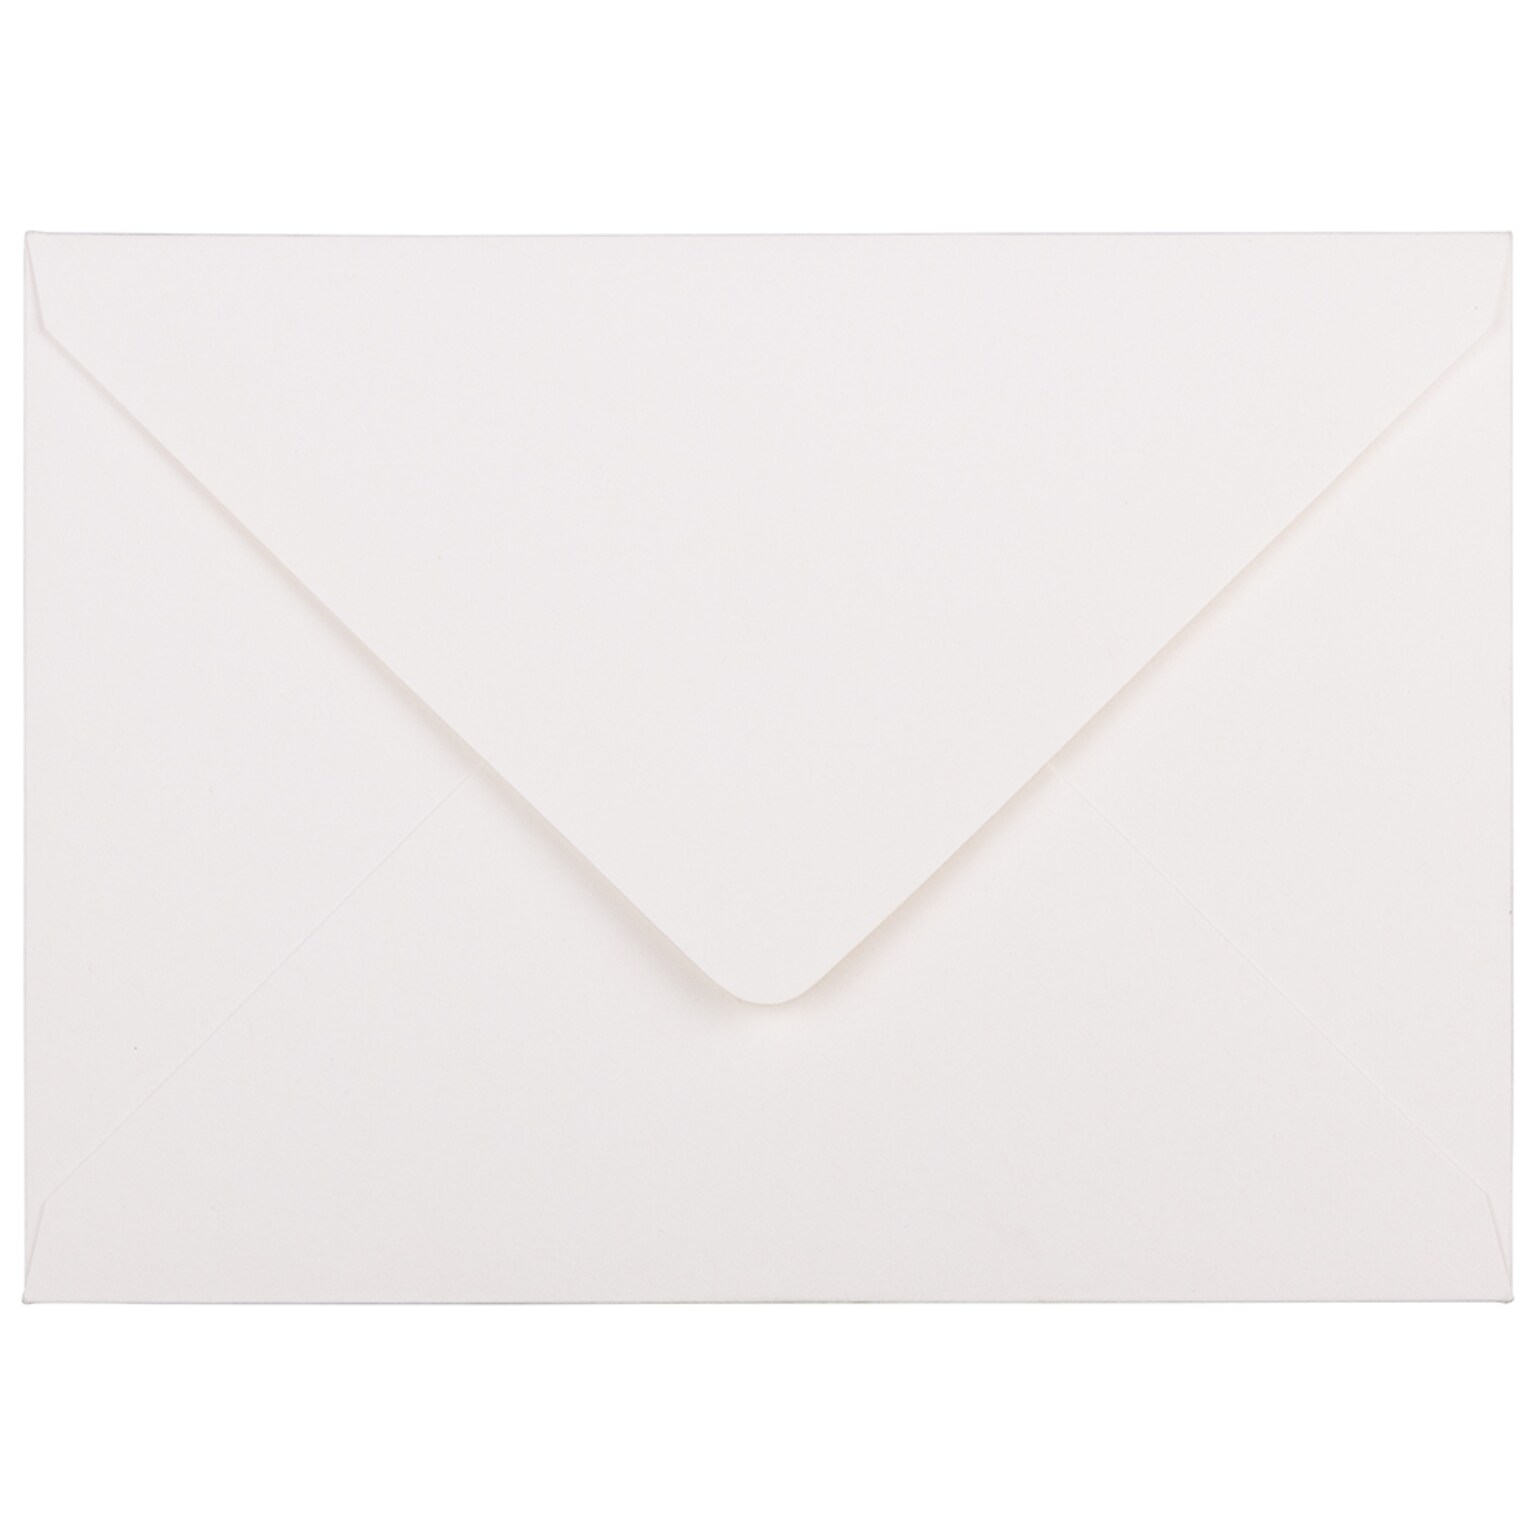 JAM Paper A7 Strathmore Invitation Envelopes with Euro Flap, 5.25 x 7.25, Bright White Laid, 50/Pack (1921397I)